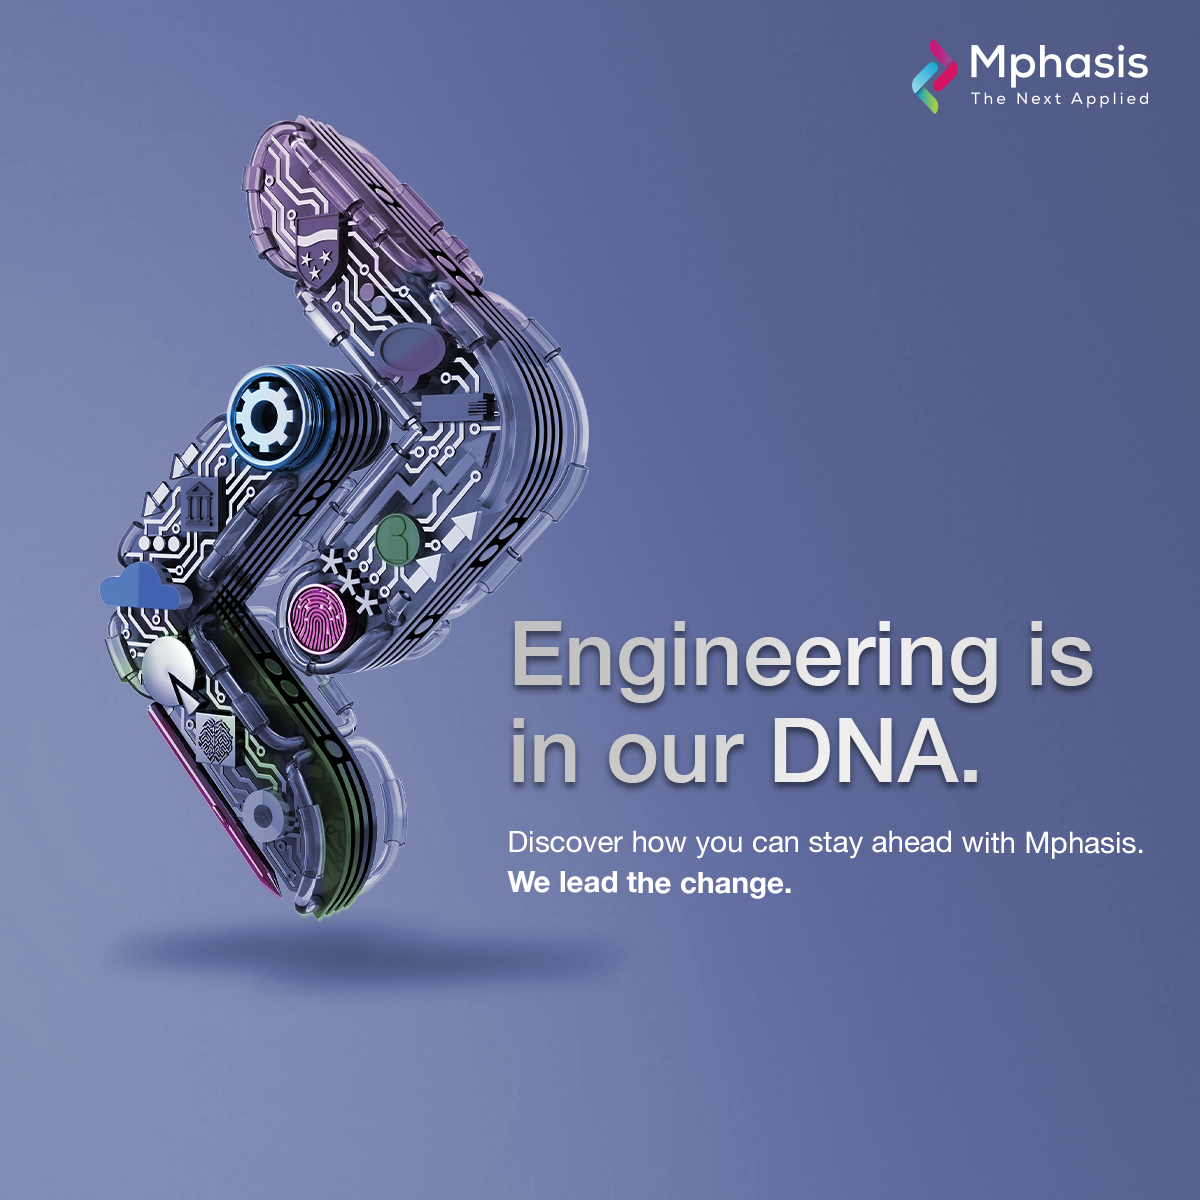 Vega Digital Awards Winner - Engineering is in our DNA Campaign , Brand: Mphasis | Agency: Gutenberg